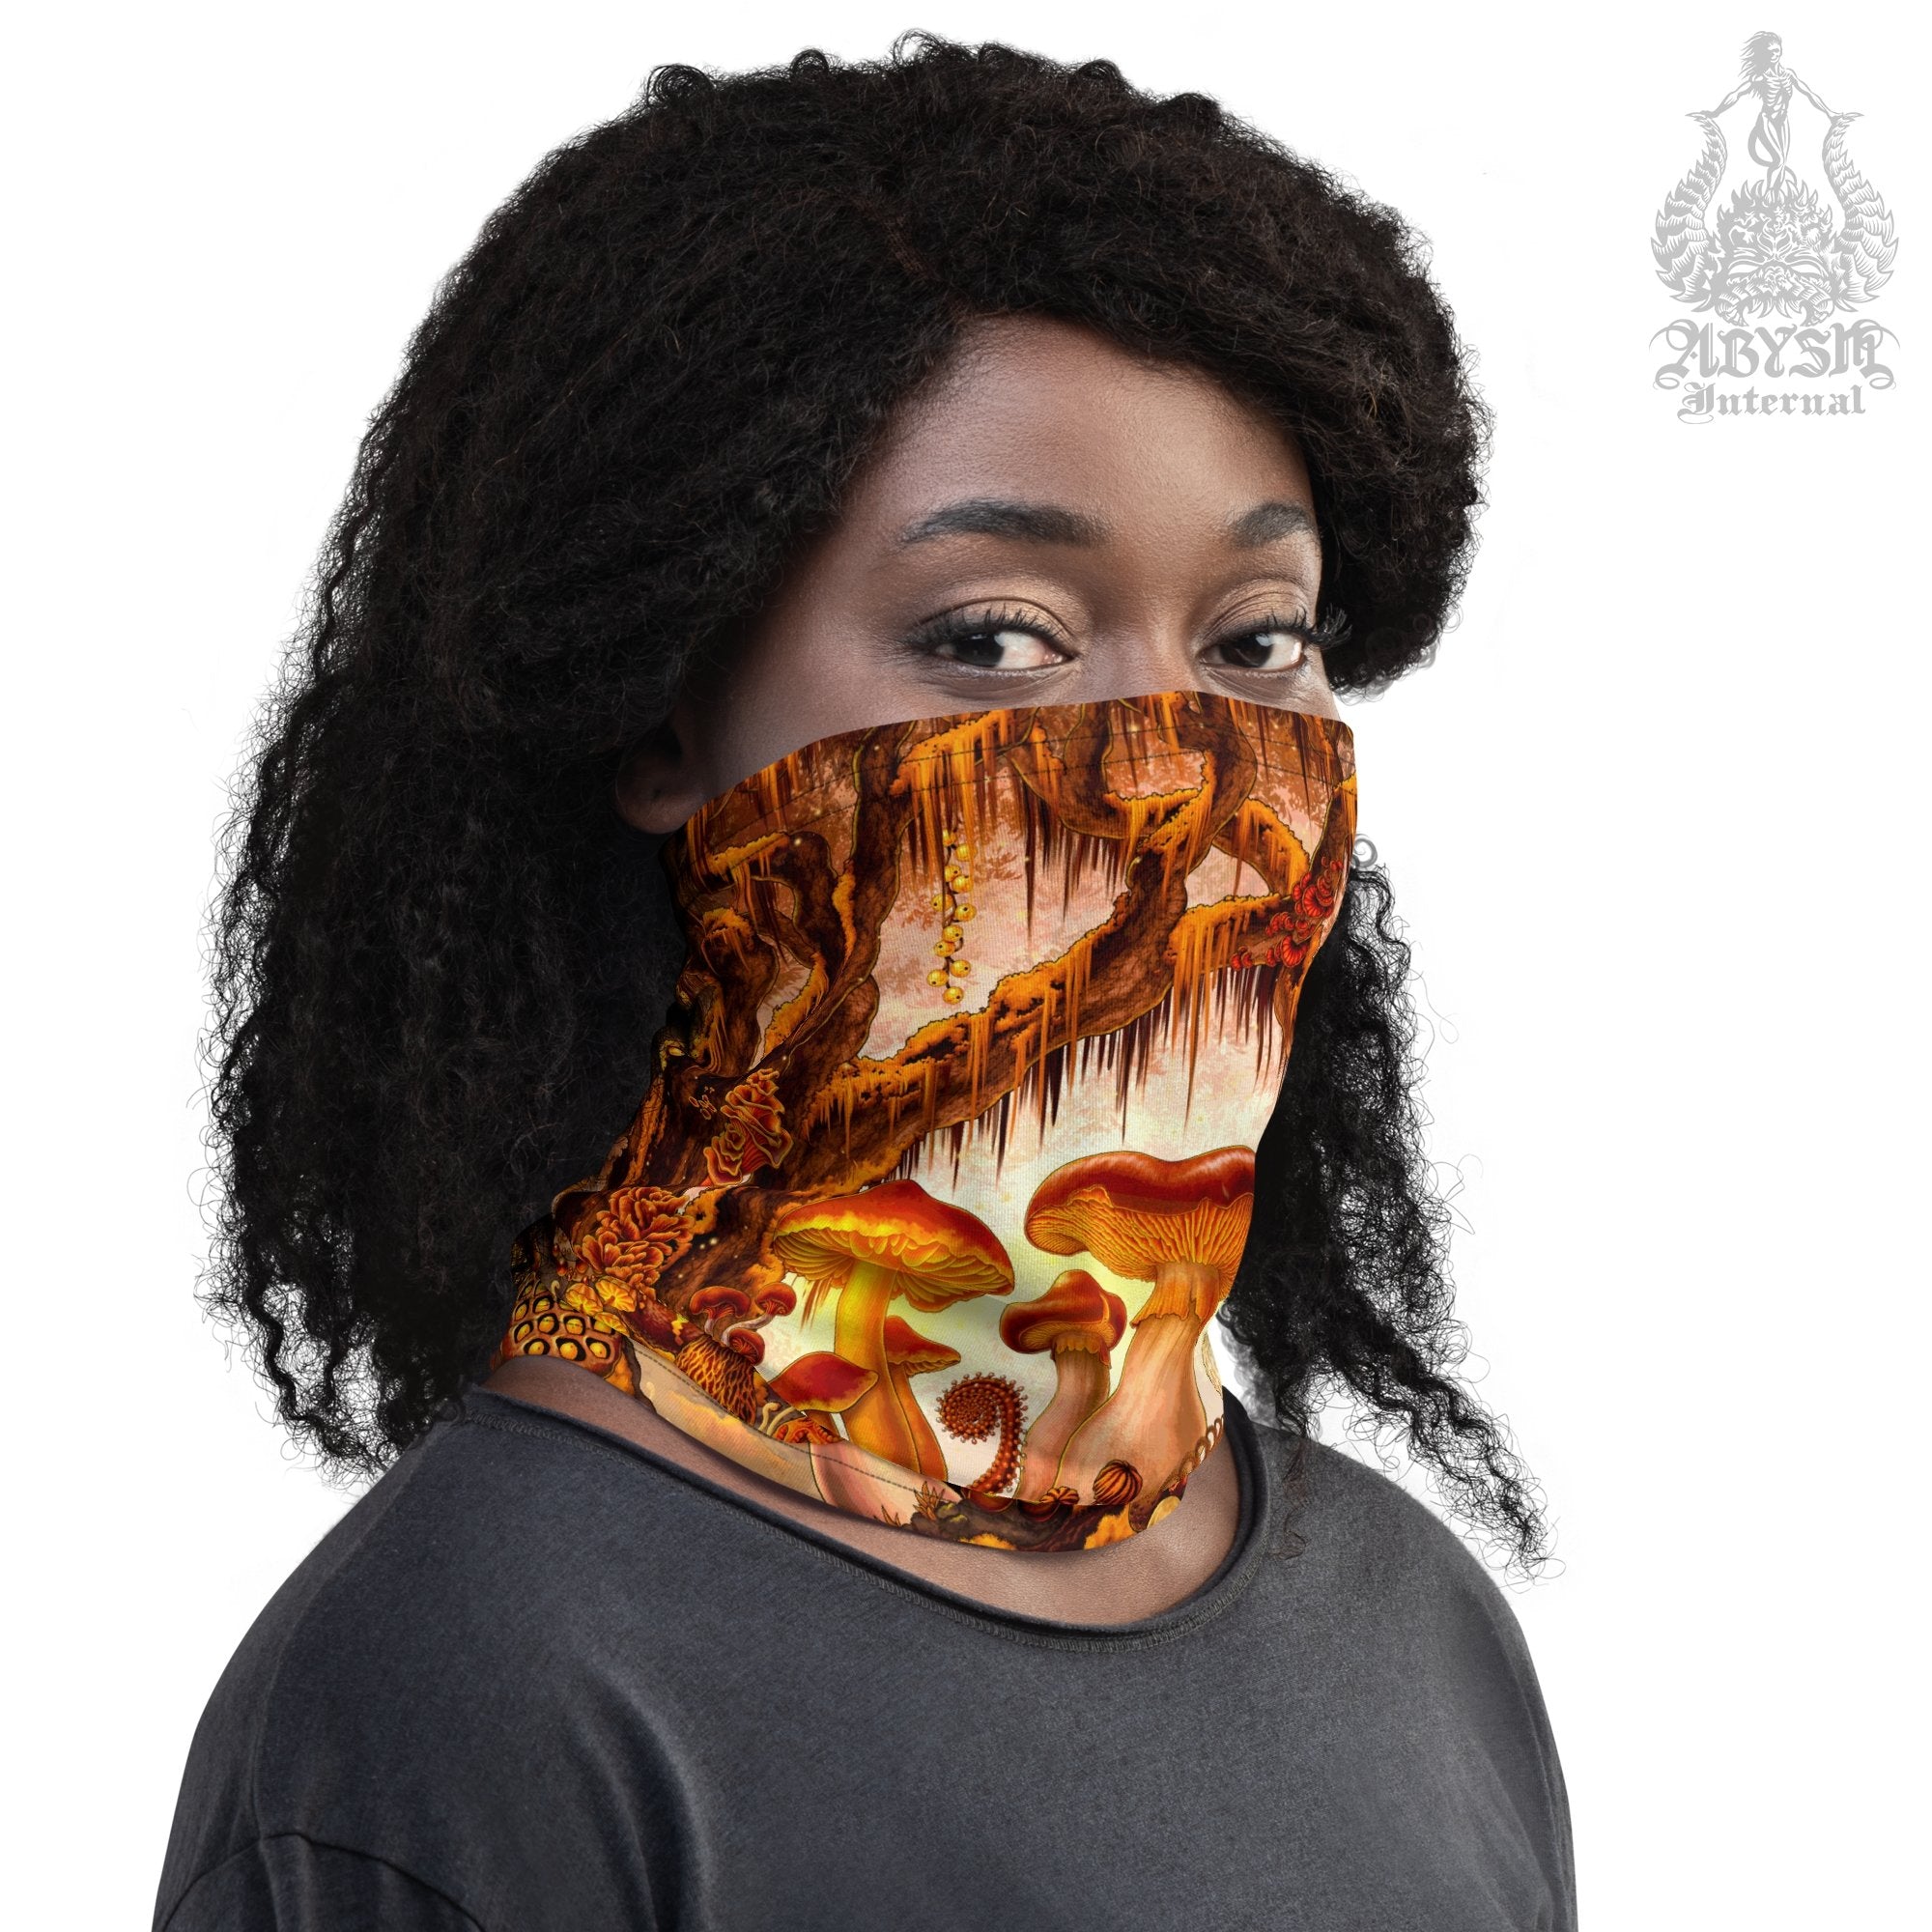 Mushrooms Neck Gaiter, Face Mask, Head Covering, Magic Shrooms Art, Indie Festival Outfit, Mycologyst Gift - Steampunk - Abysm Internal